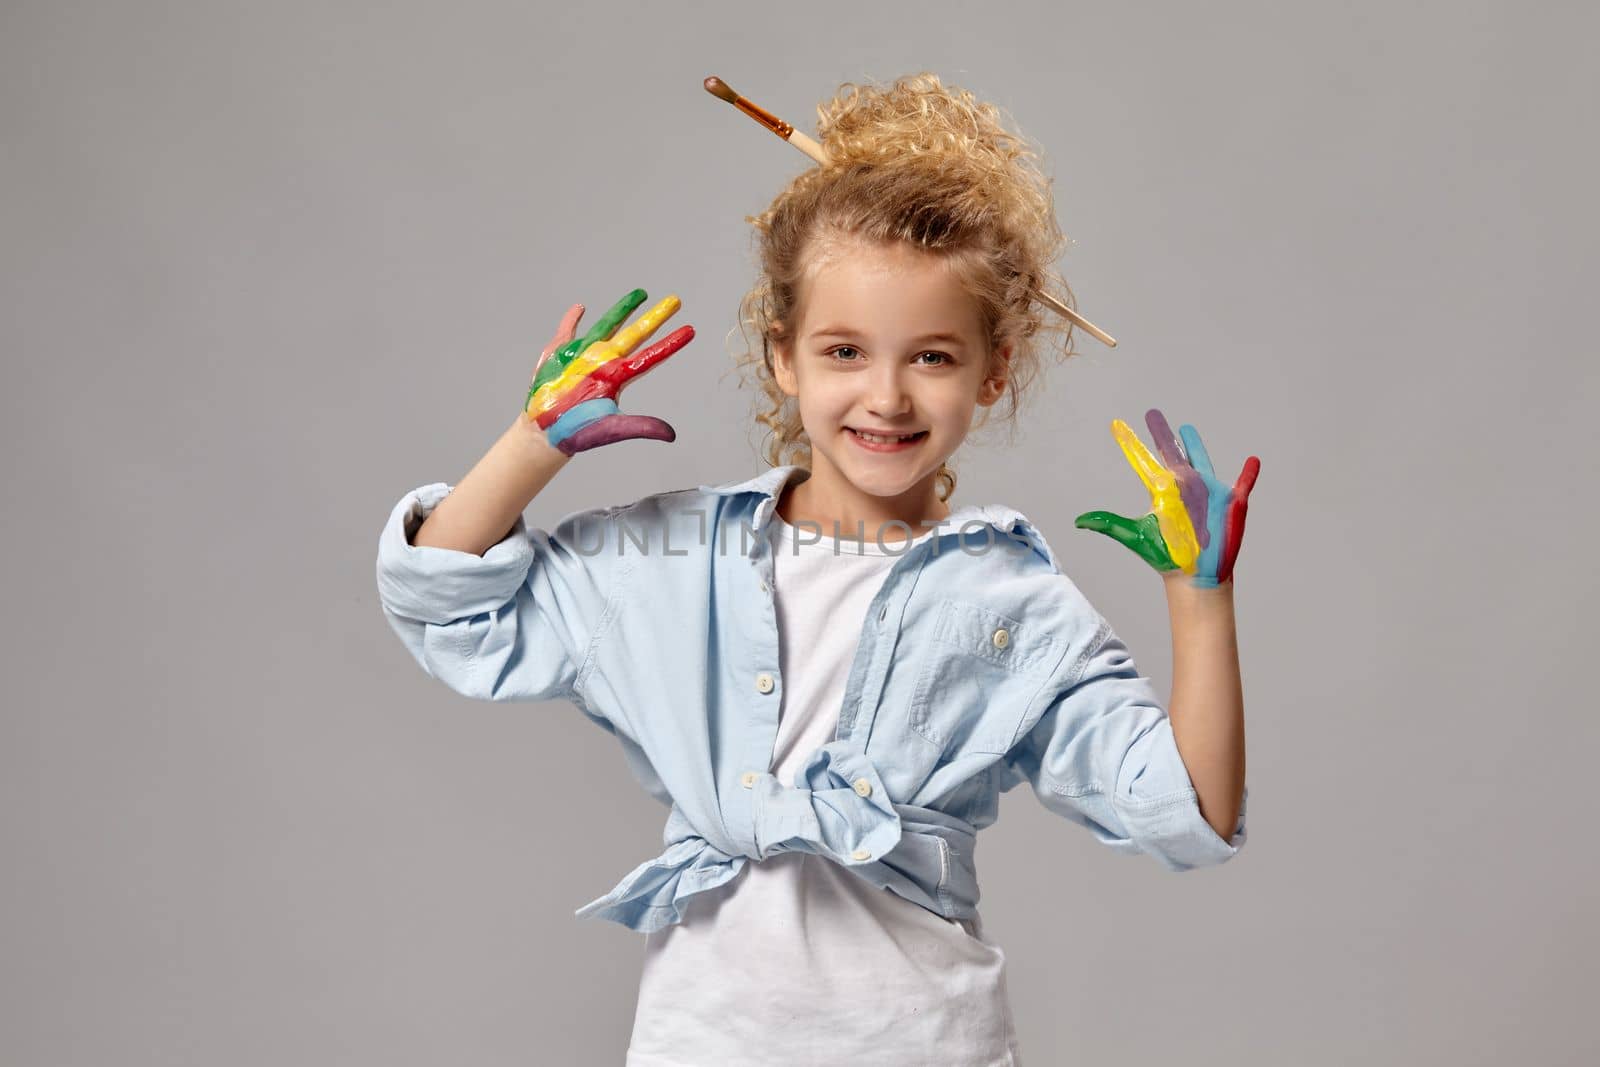 Beautiful little girl having a brush in her chic curly blond hair, wearing in a blue shirt and white t-shirt, with a painted fingers is posing on a gray background.